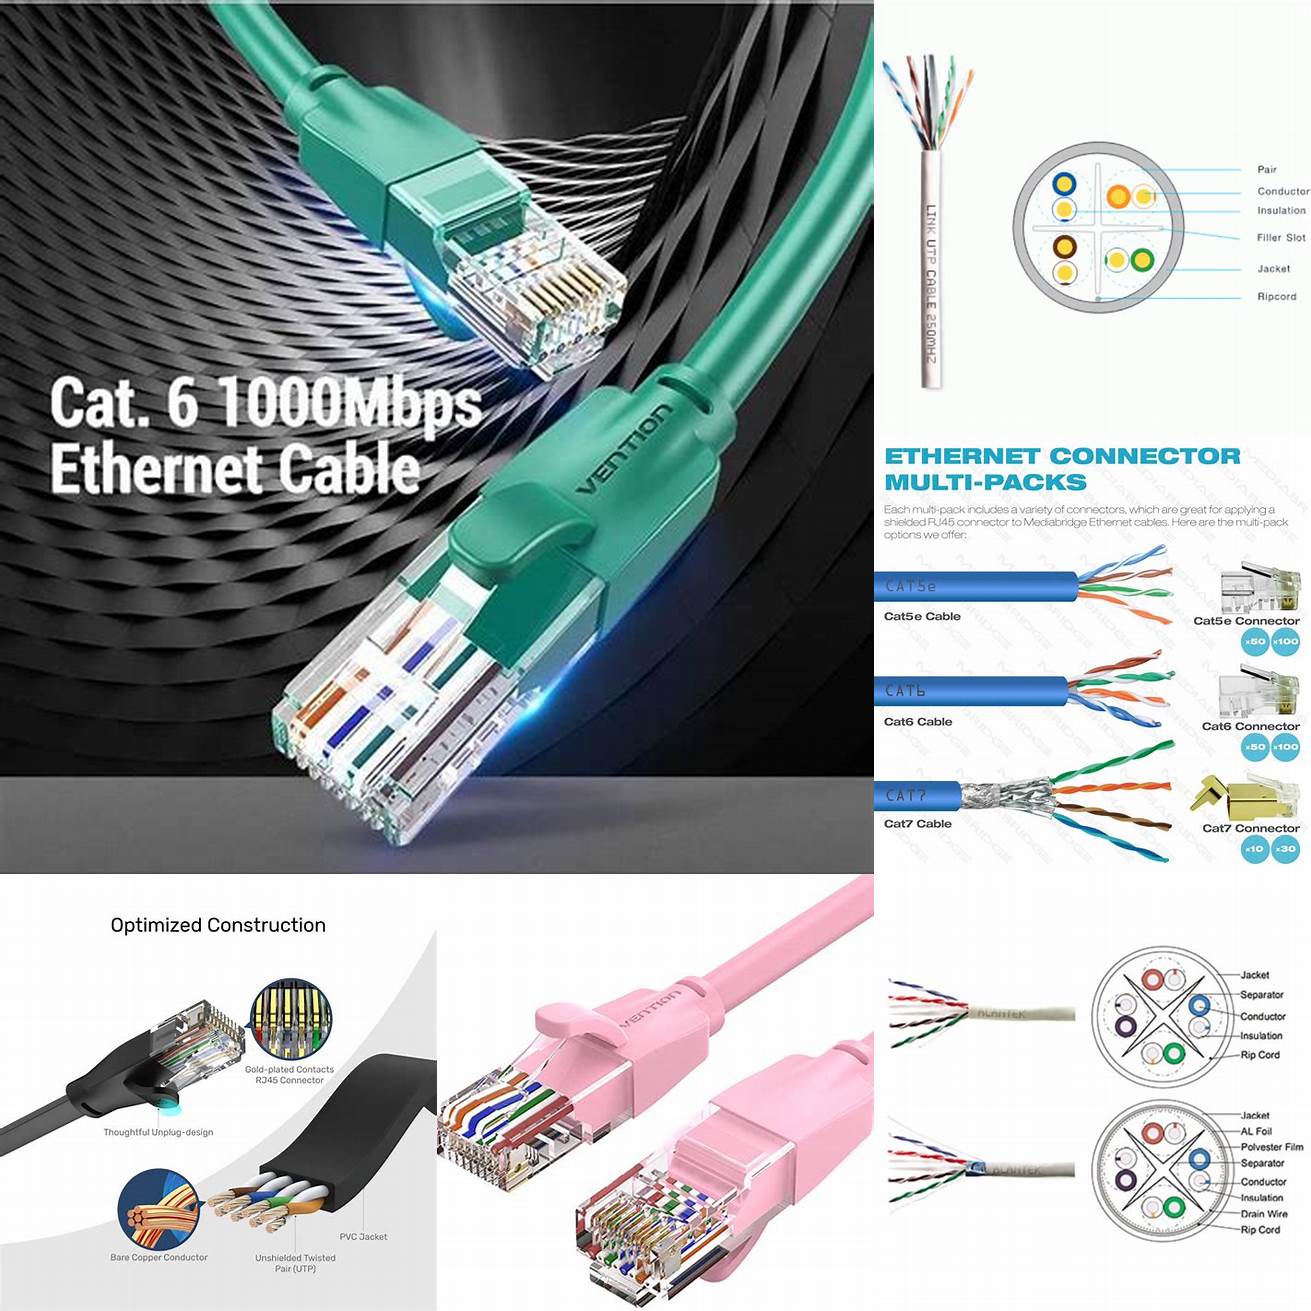 4 Cat 6 cables have a bandwidth of 250MHz